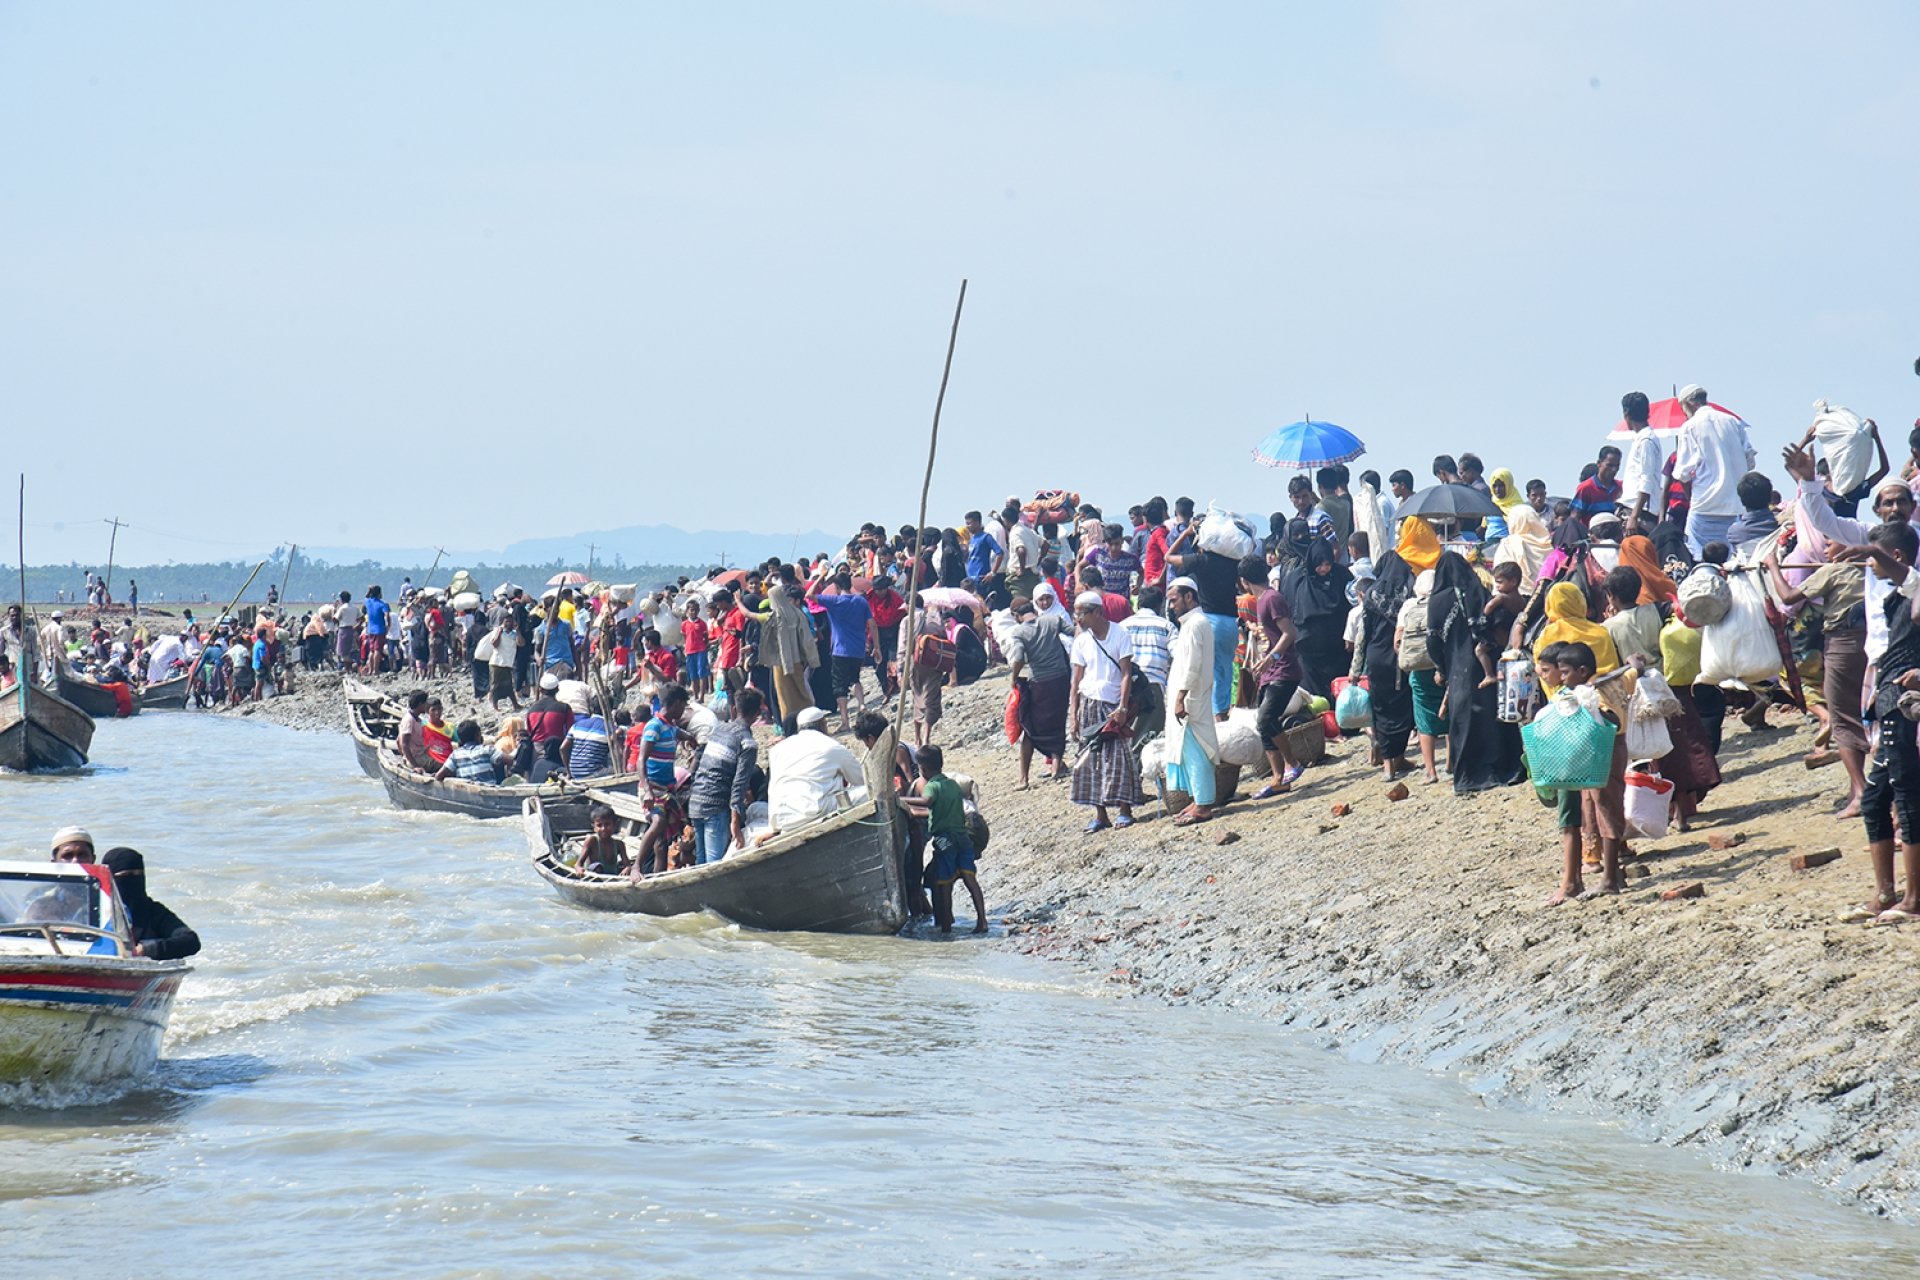 At a shoreline, there is a crowd of people on the beach and also a line of crowded boats with Rohingya refugees.